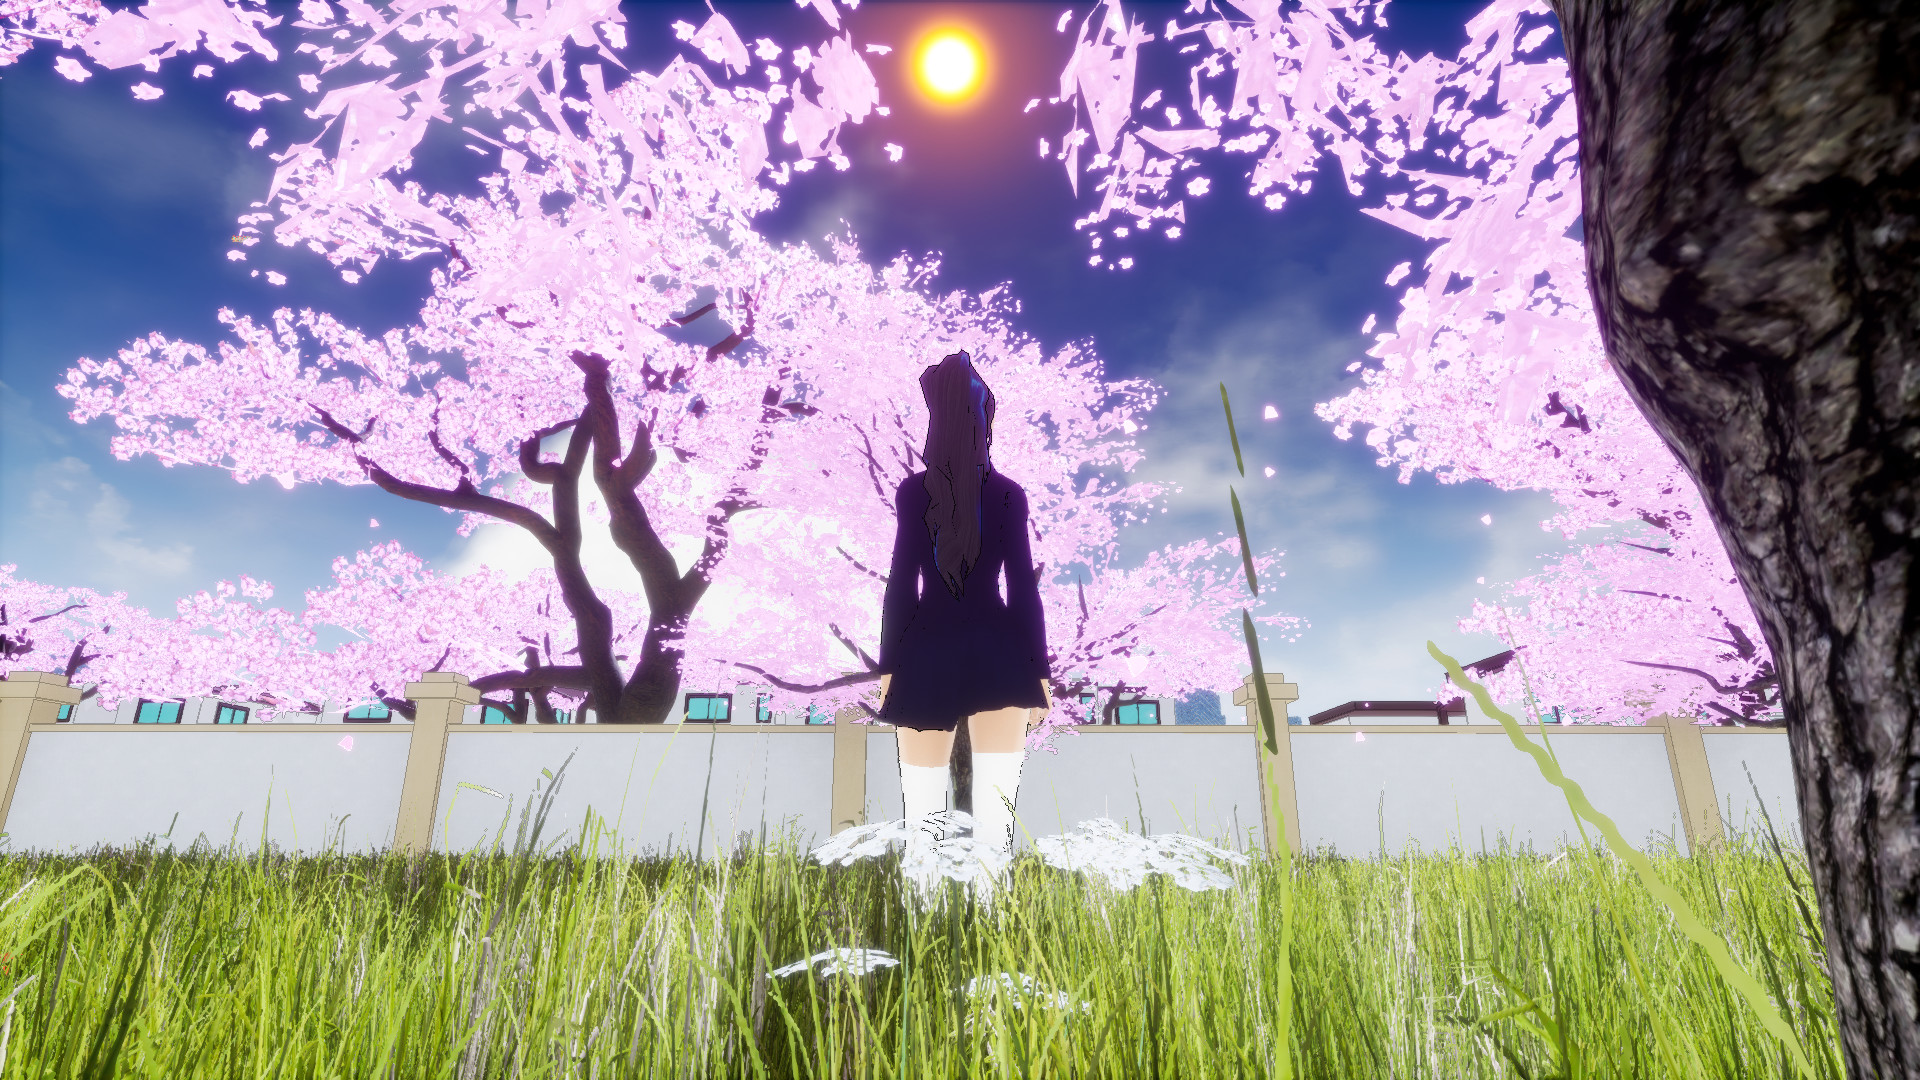 Yuna and other troubles screenshot